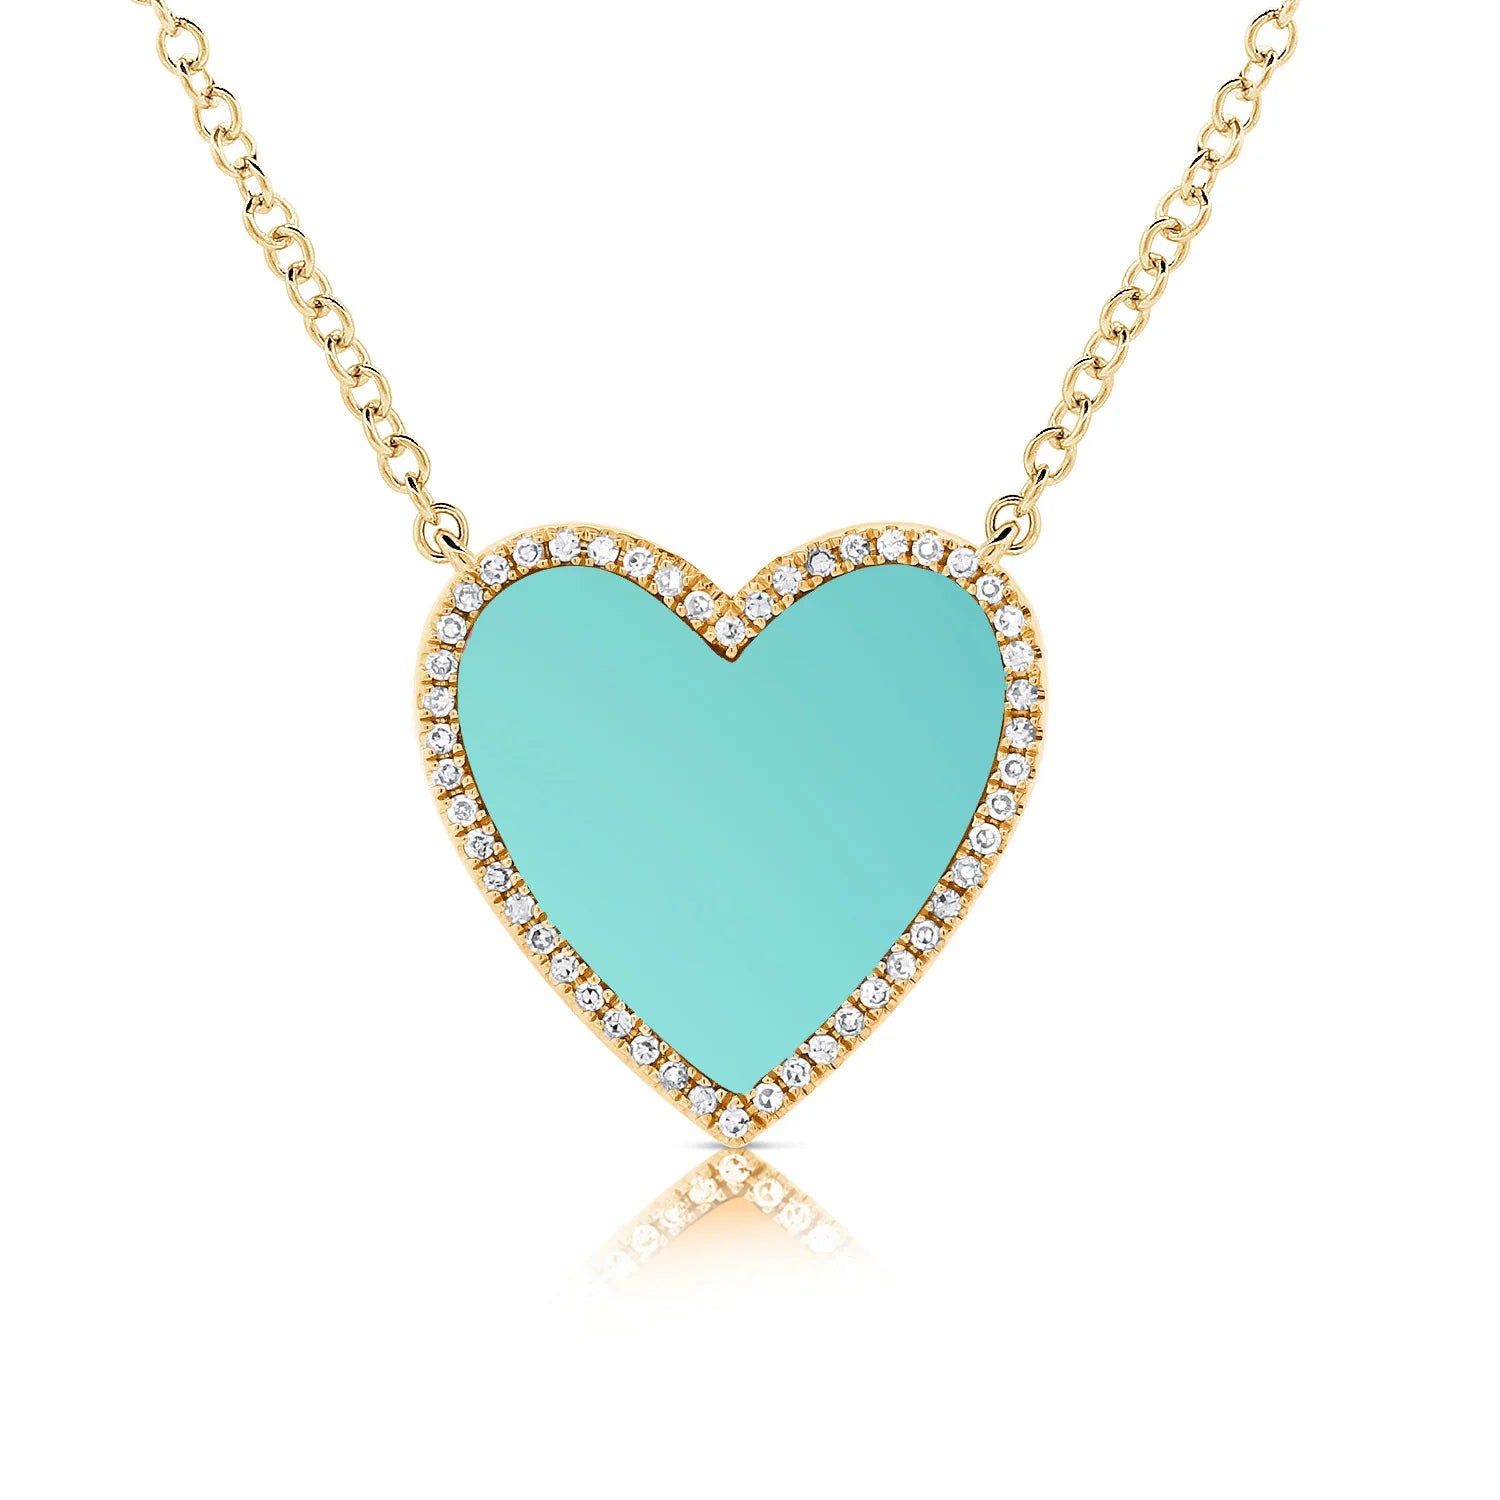 14kt Gold 0.14 CTW Diamond & Turquoise Heart Necklace